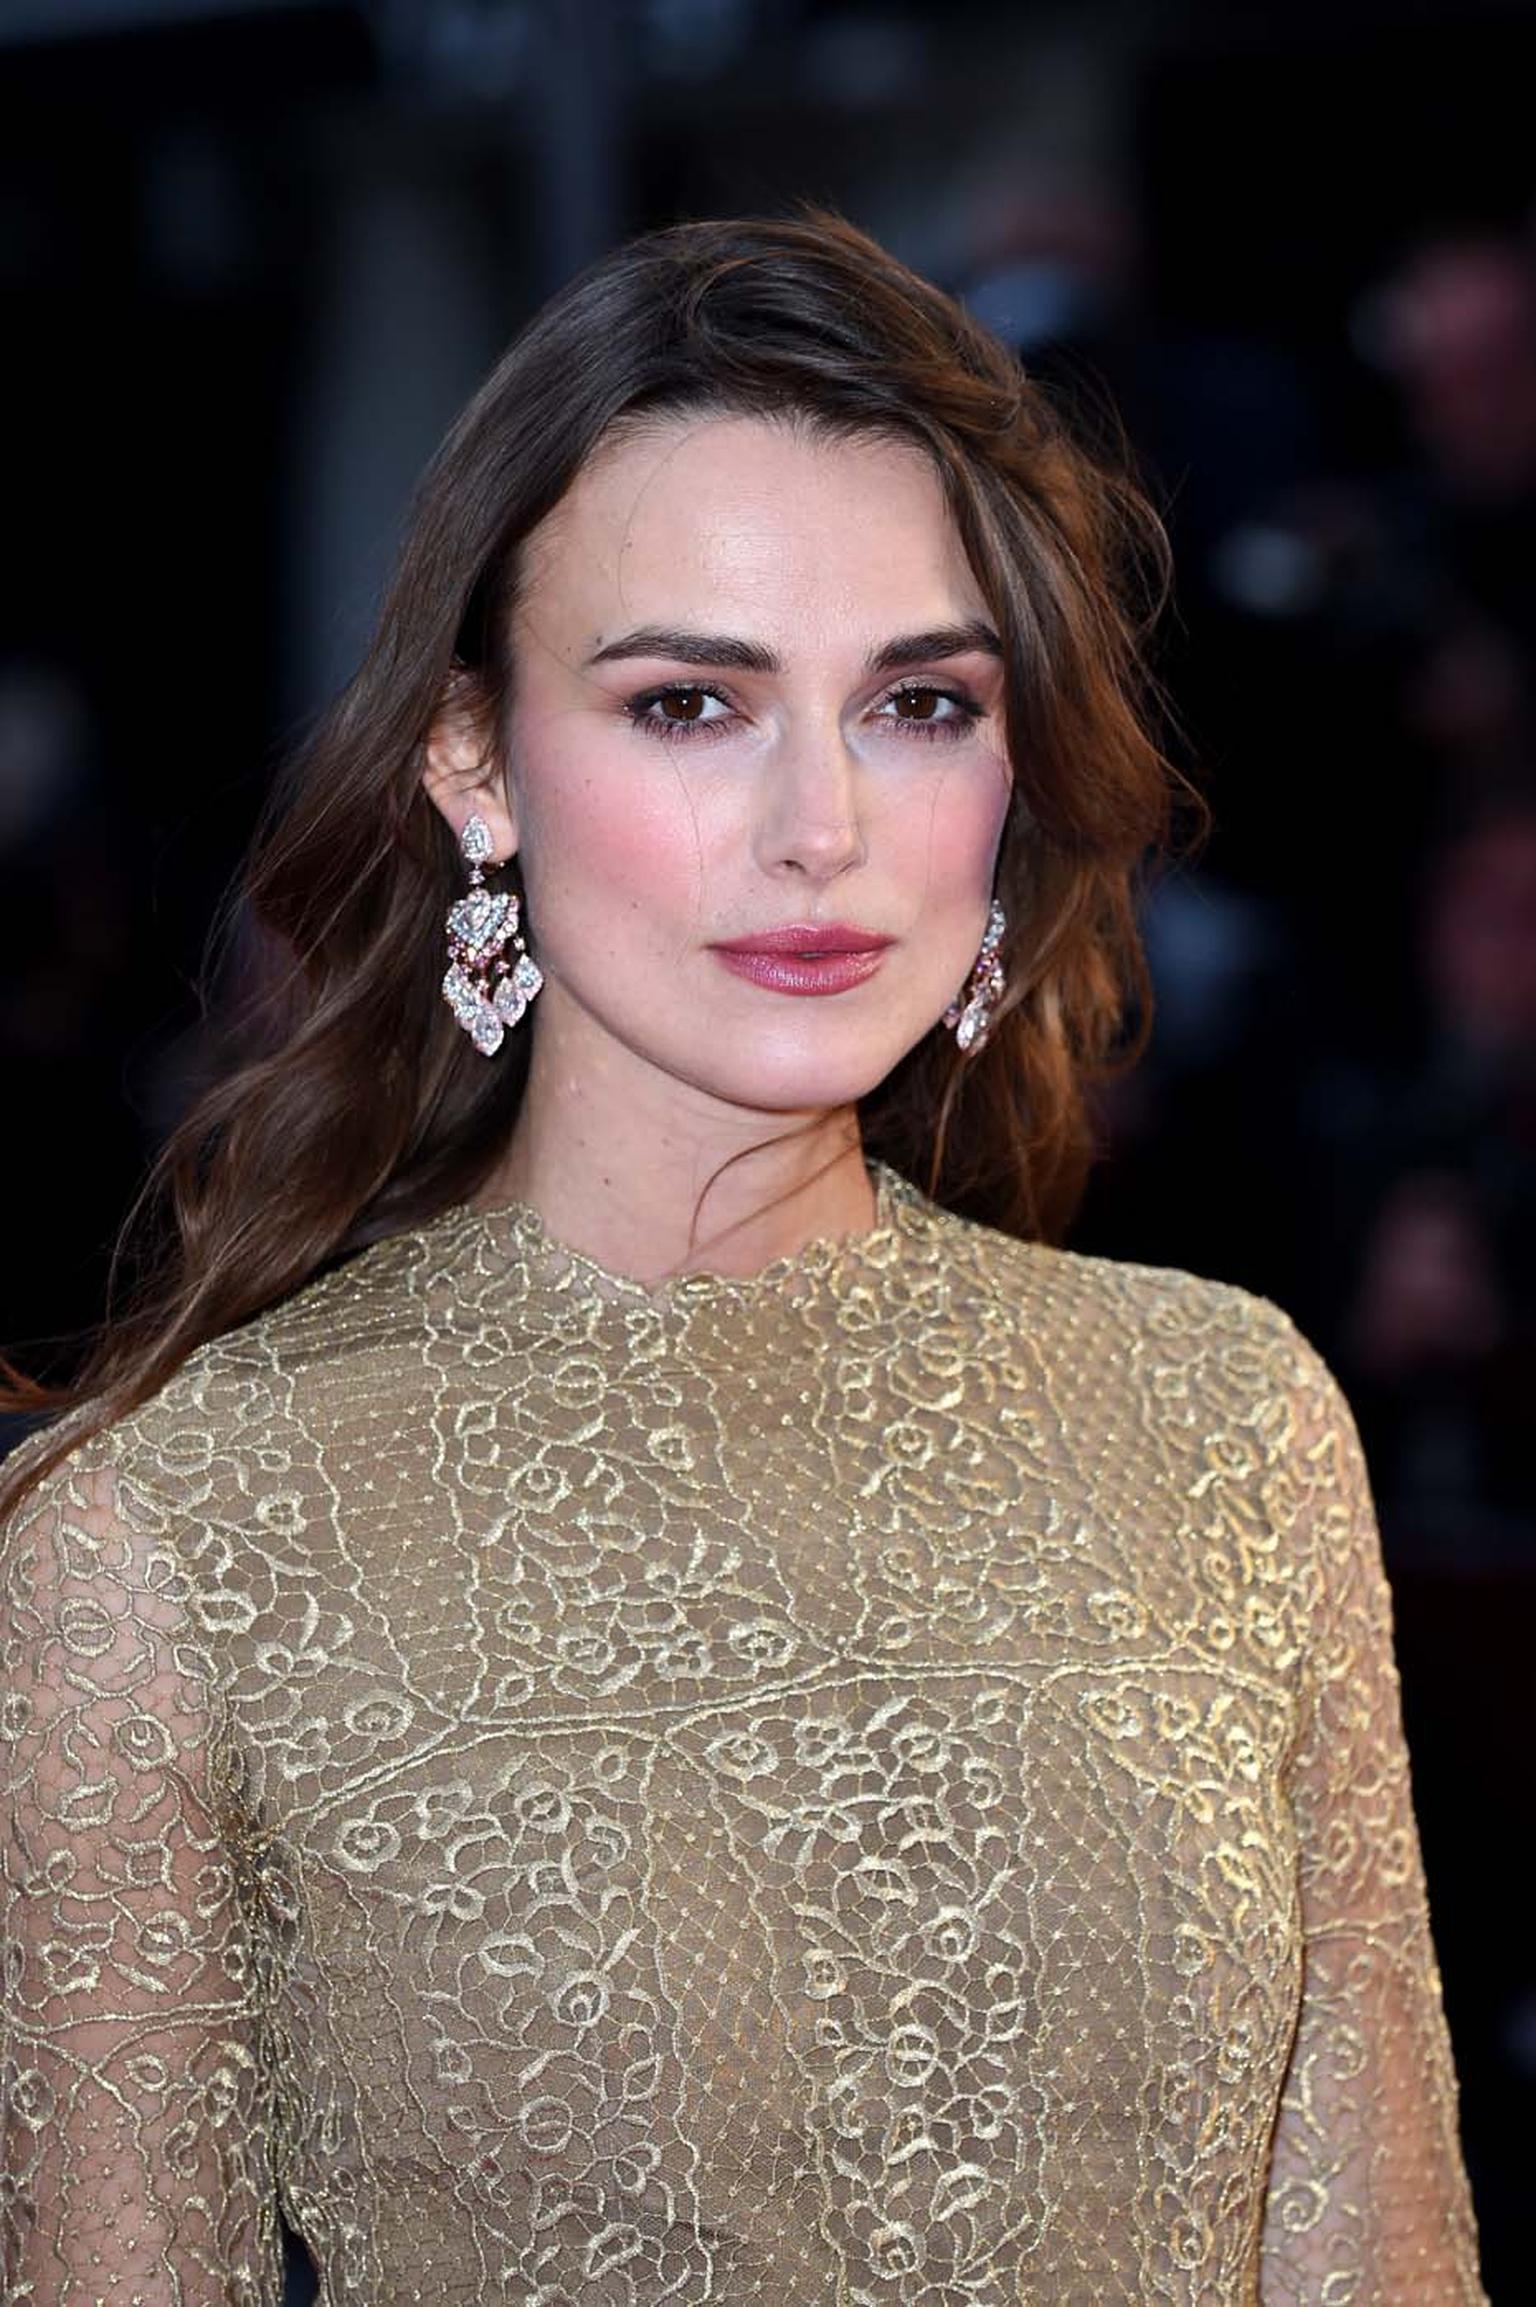 The David Morris pink and white diamond Pagoda earrings perfectly complemented the actress’ Valentino Couture gold lace dress as she braved the blustery weather for the opening of the 58th BFI London Film Festival last week.